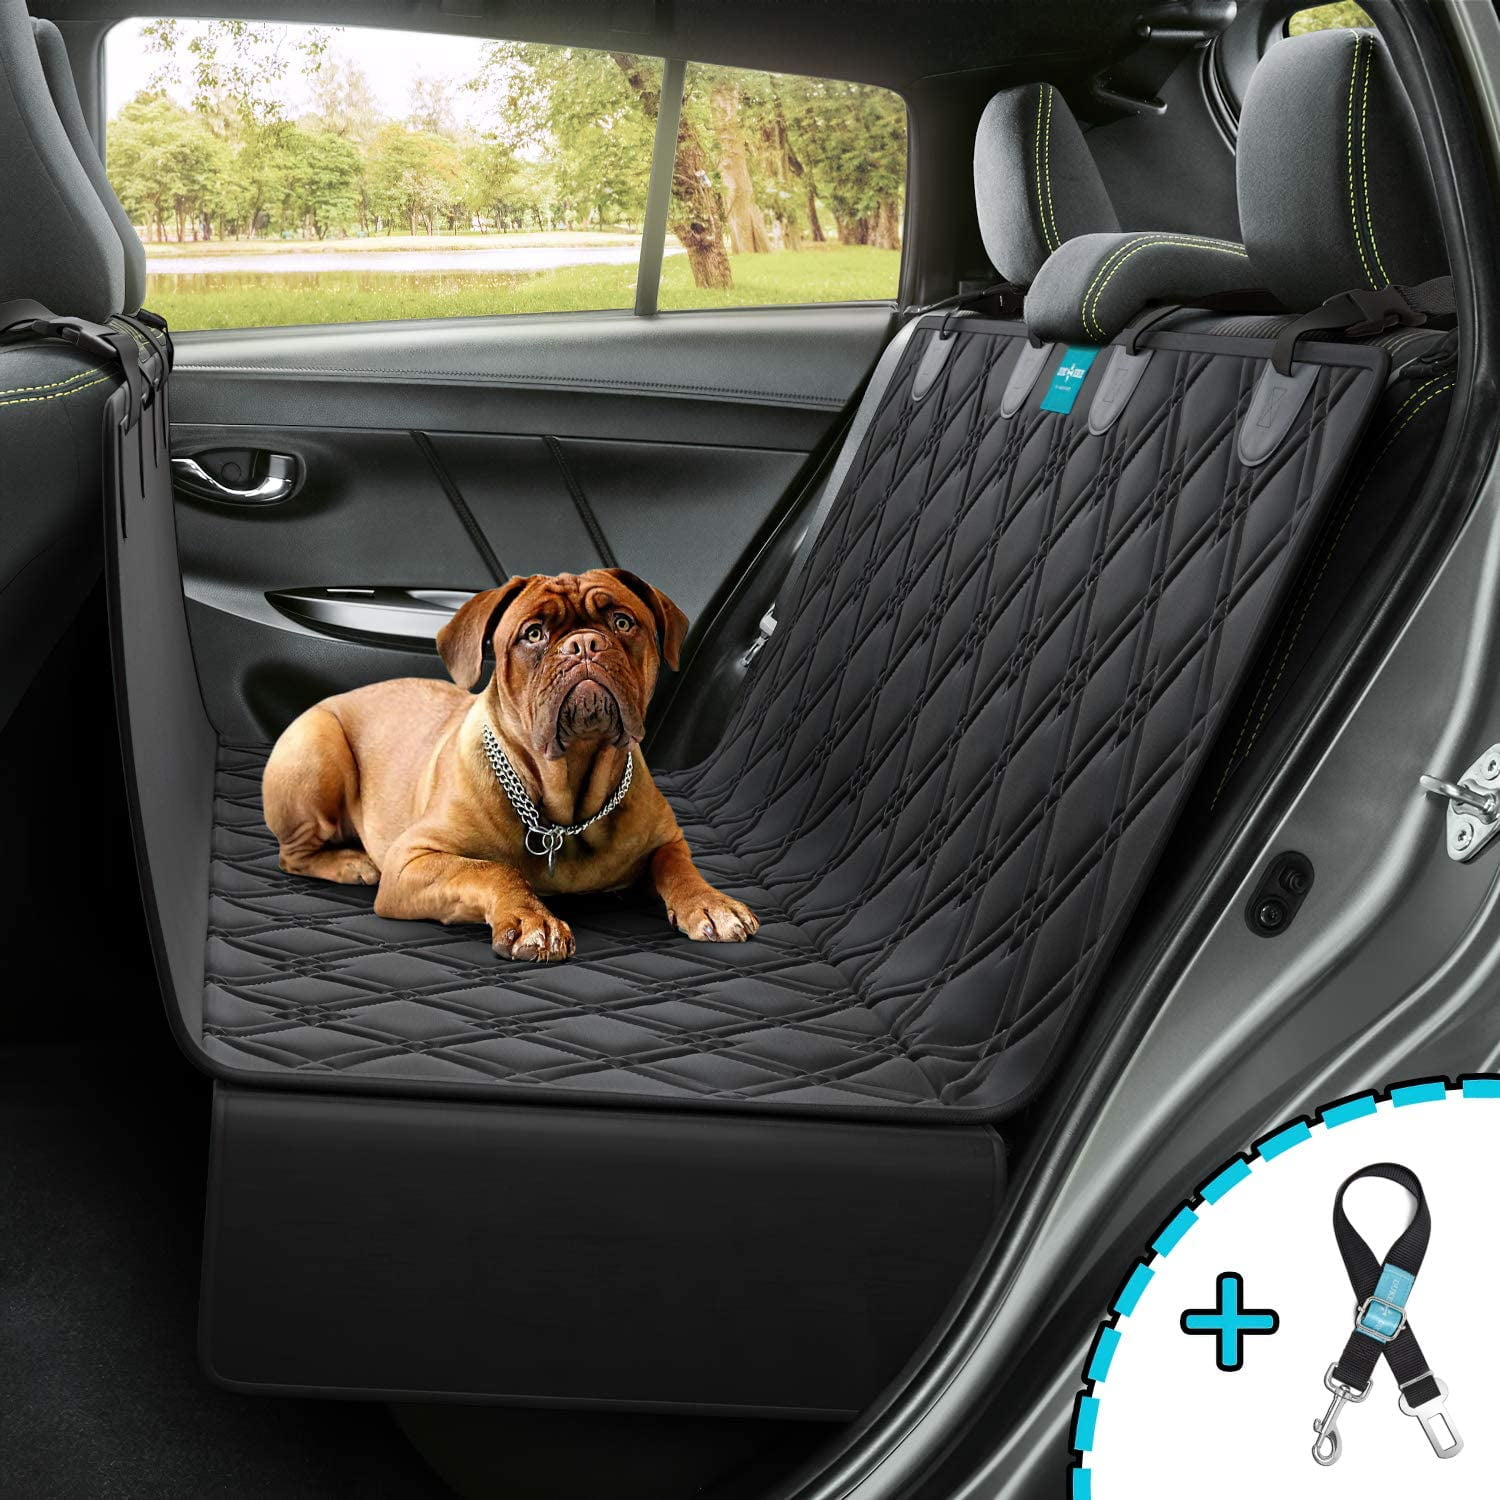 Vailge Extra Large, 100% Waterproof Dog Seat Cover for Back Seat with  Zipper Side Flap, Heavy Duty car Hammock Pet Seat Cover for Cars Trucks suvs